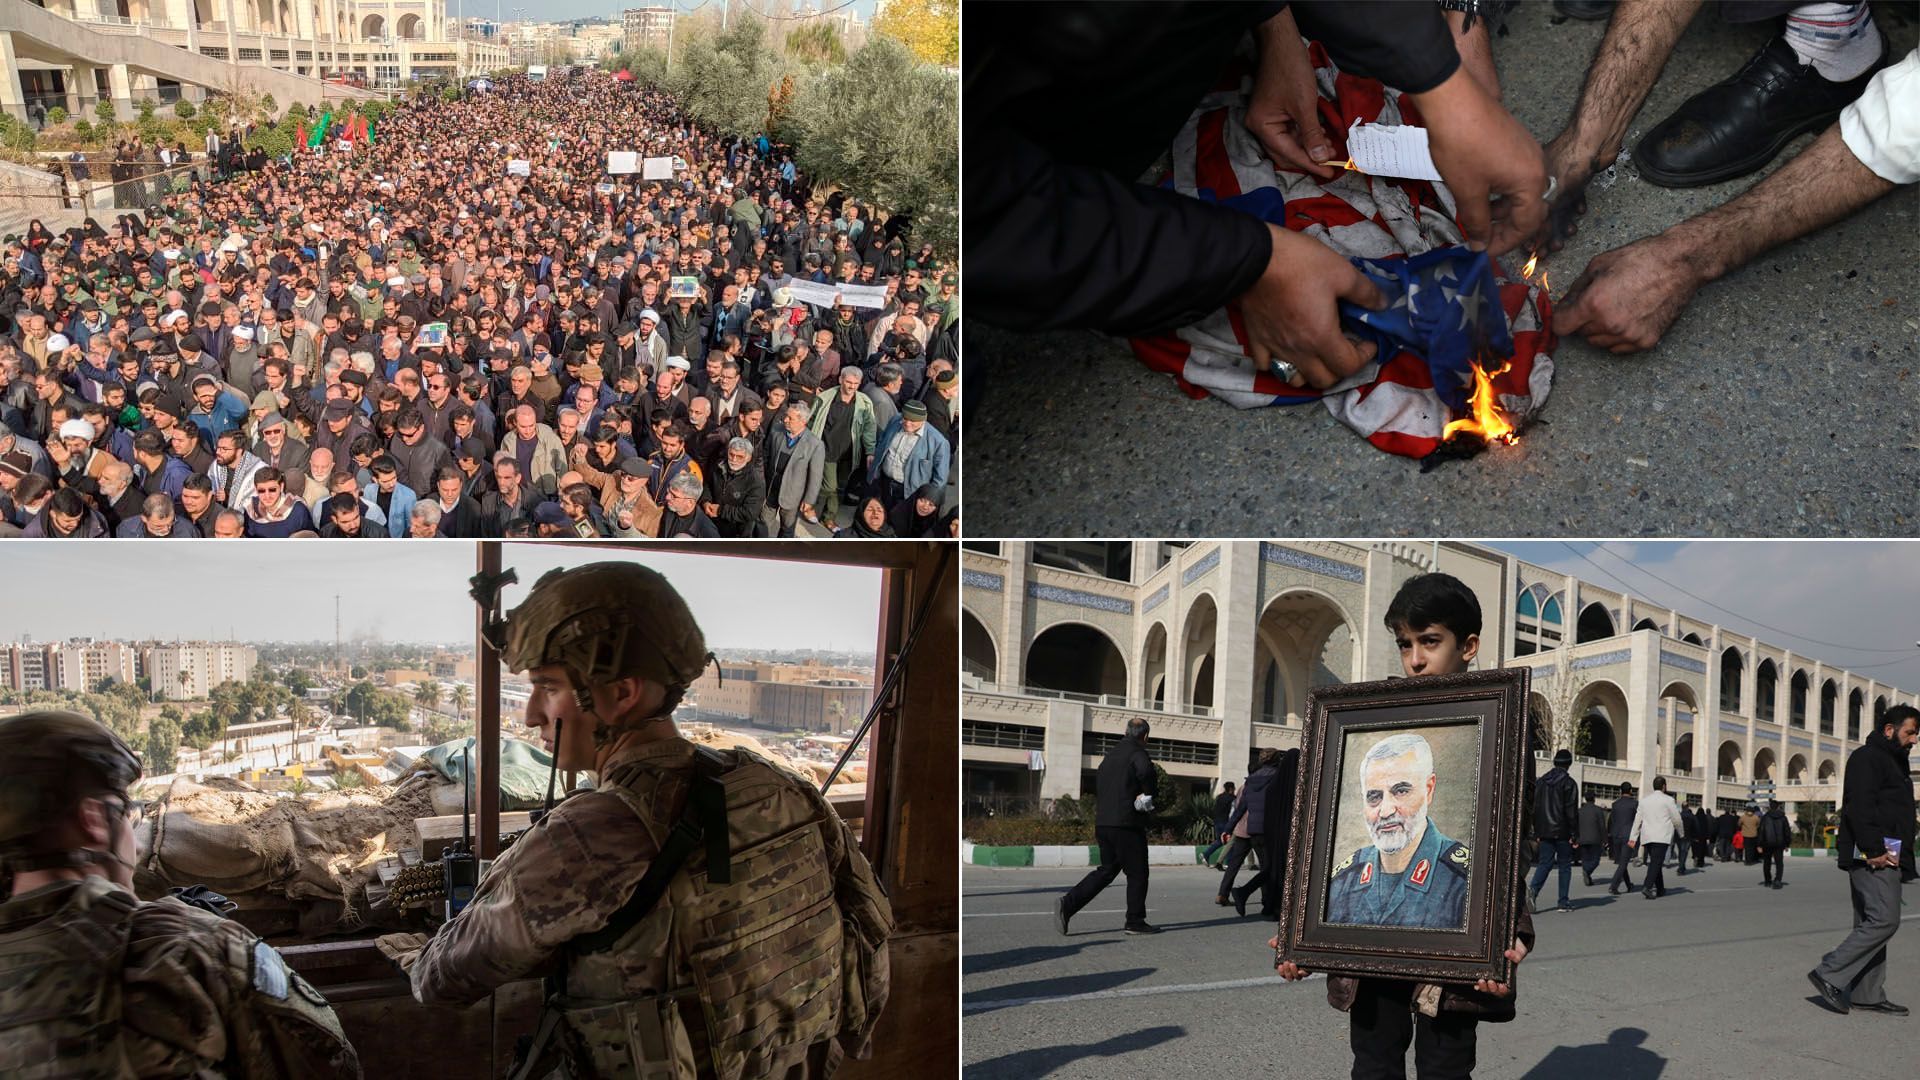 This image shows four photos: A crowd of people, an American flag burning, a soldier looking out a window, and a man holding a portrait of Soleimani